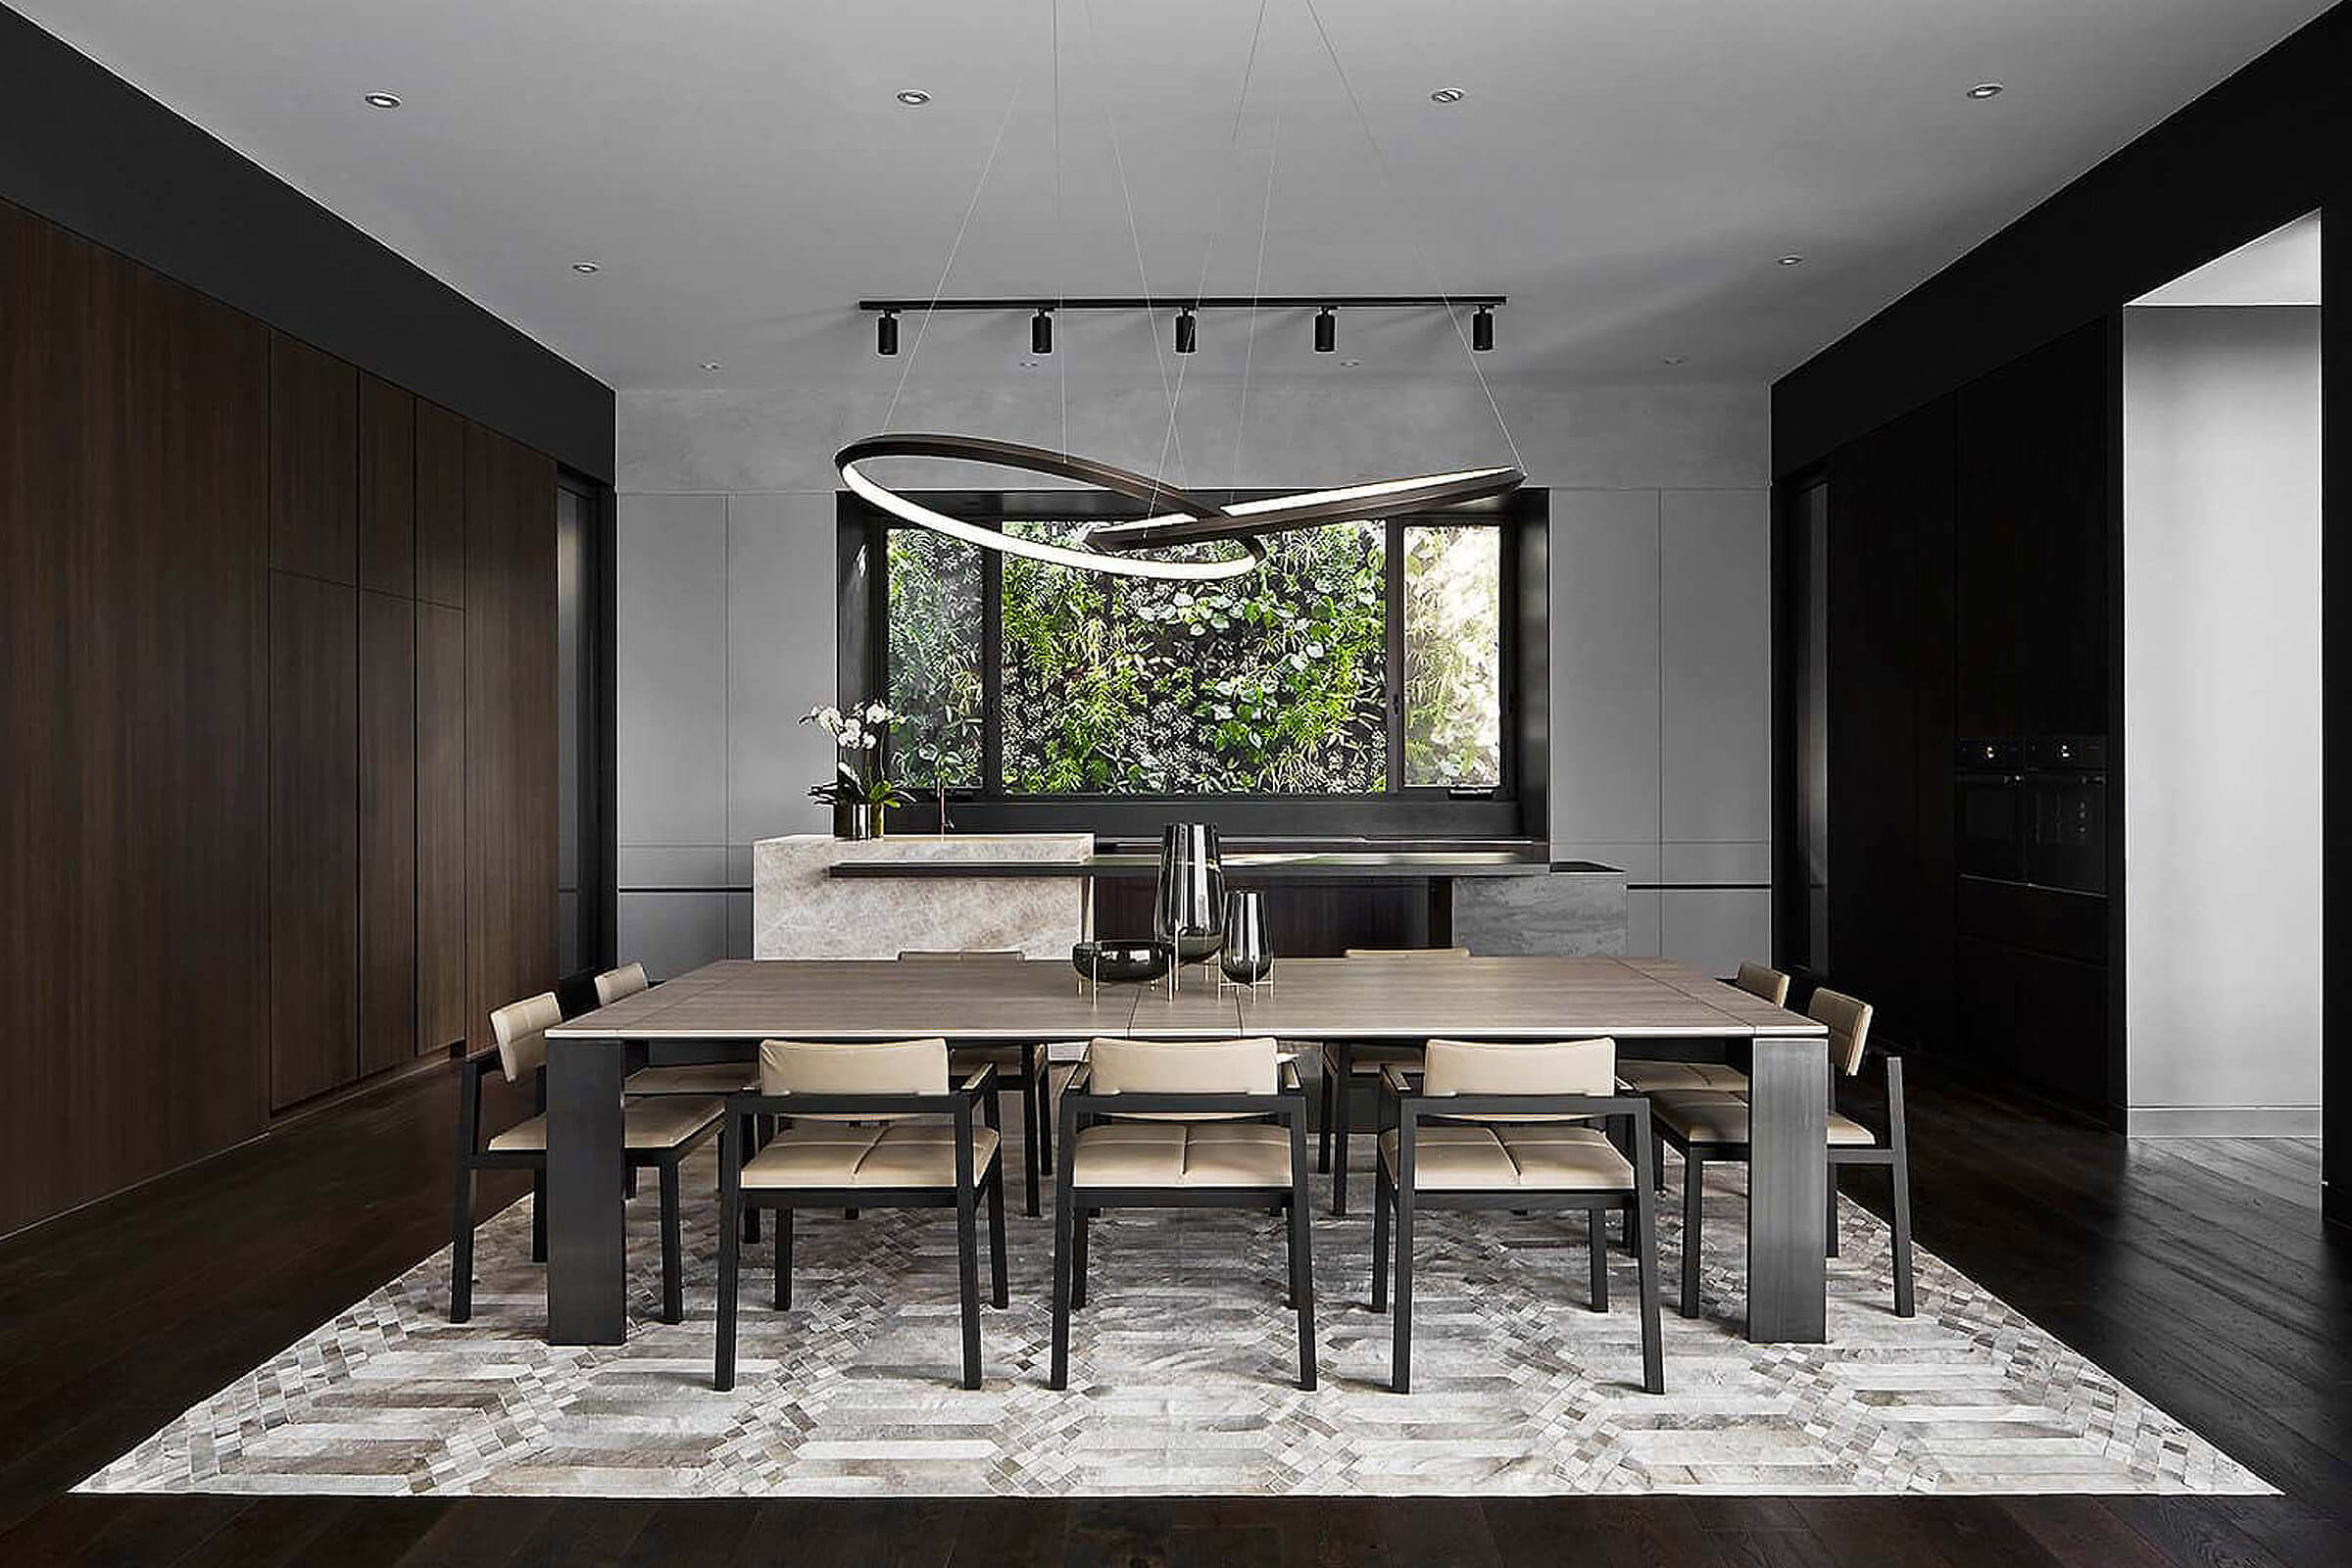 The heartbeat of this jaw dropping family home is the dining room featuring Australian Designer FrancoCrea's dinning set as centre stage